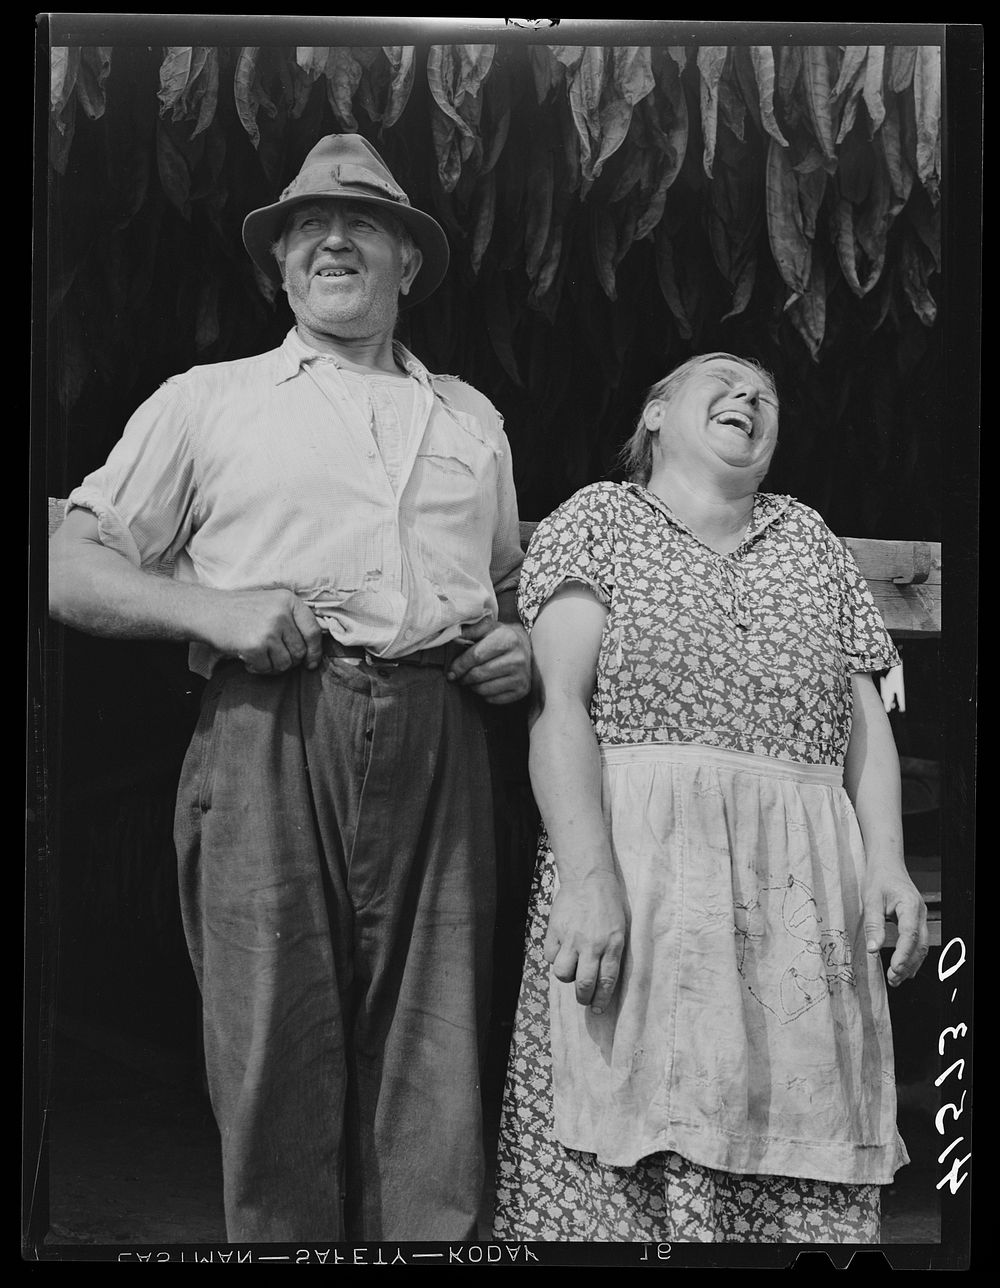 Mr. and Mrs. Andrew Lyman, Polish tobacco farmers near Windsor Locks, Connecticut. Sourced from the Library of Congress.